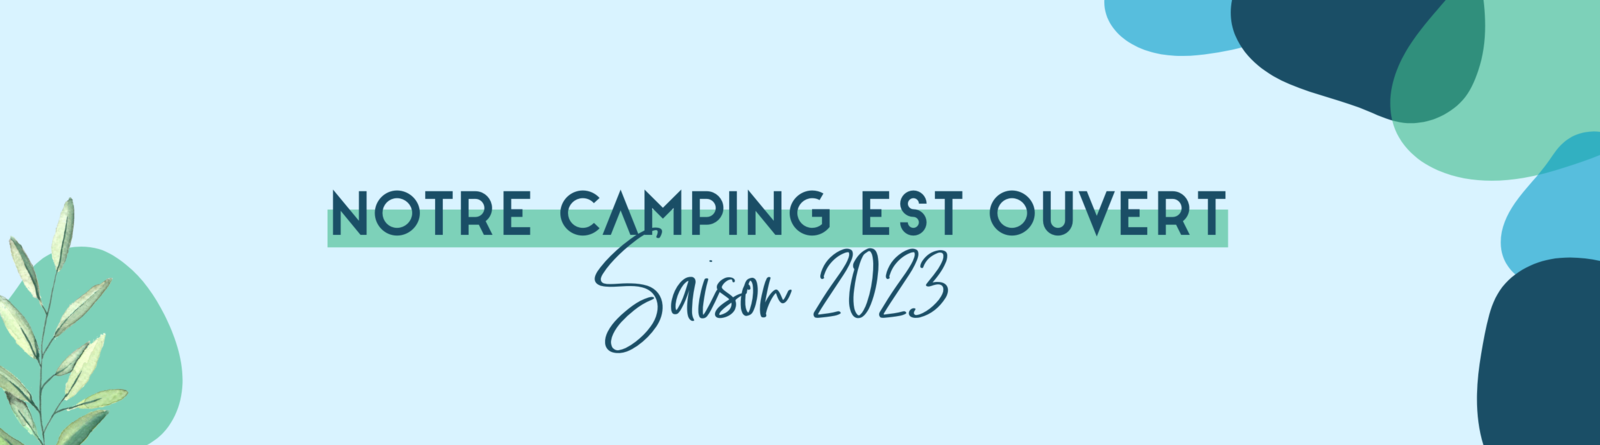 Ouverture camping